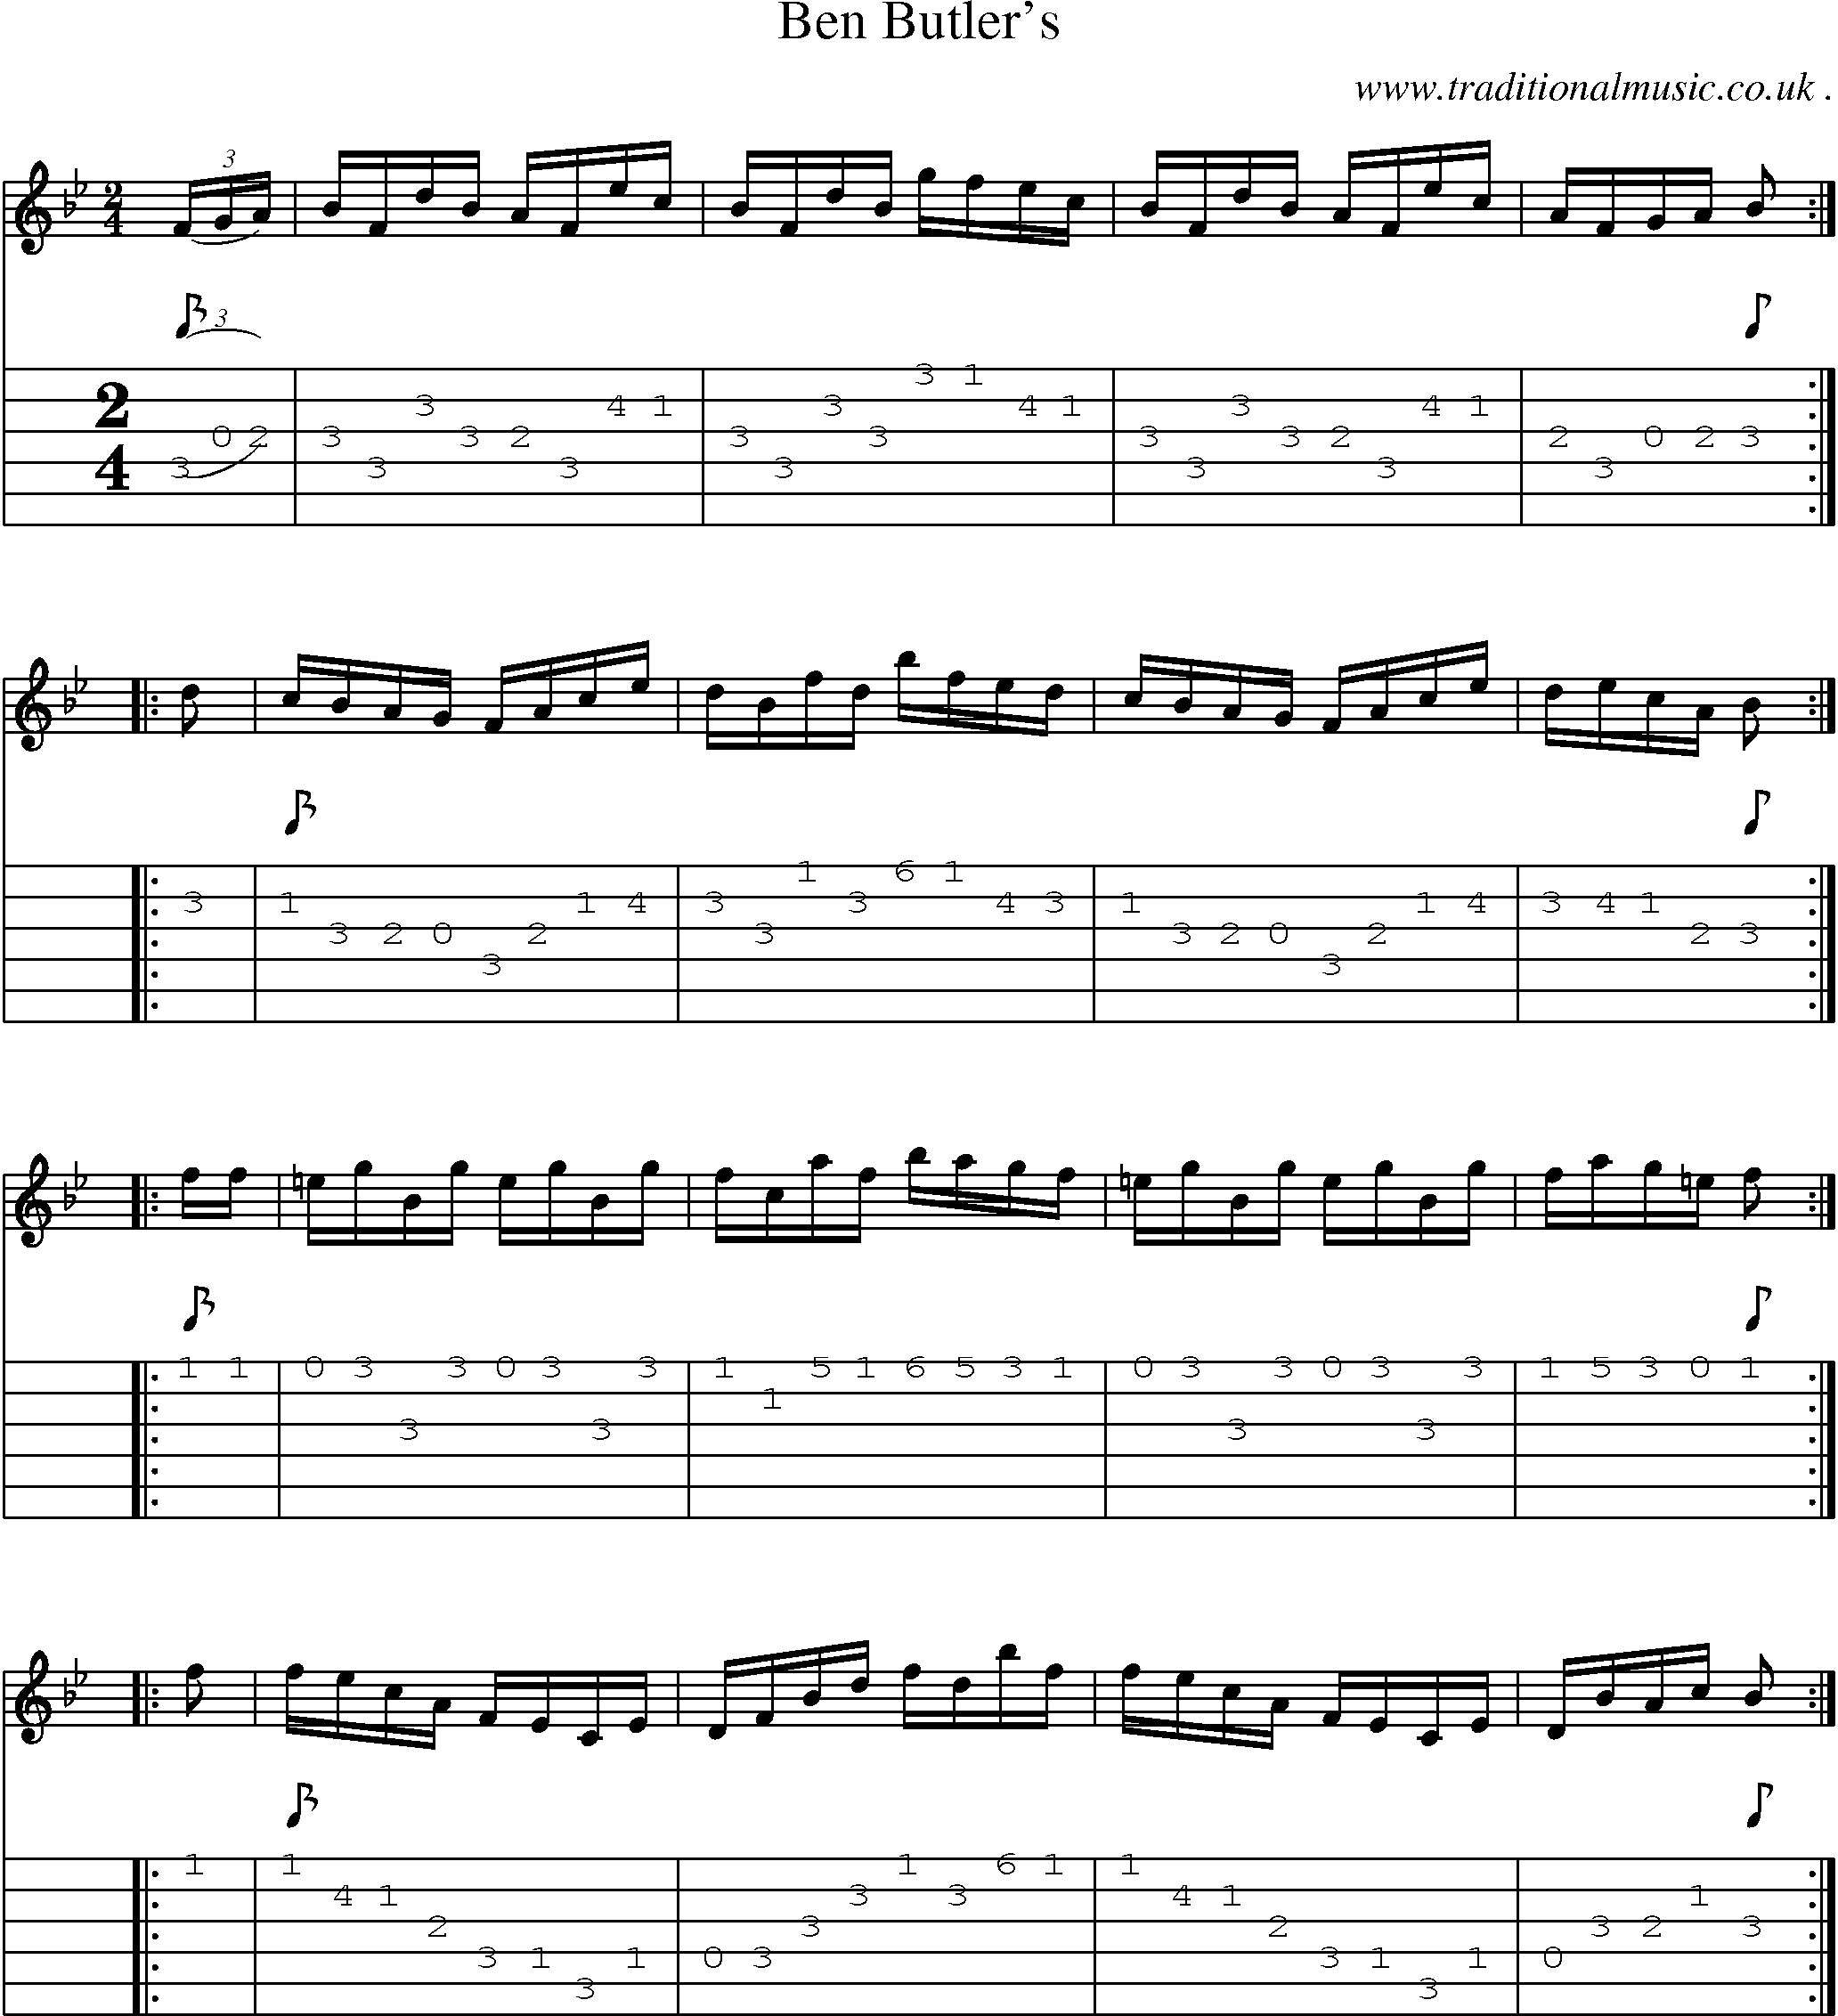 Sheet-Music and Guitar Tabs for Ben Butlers